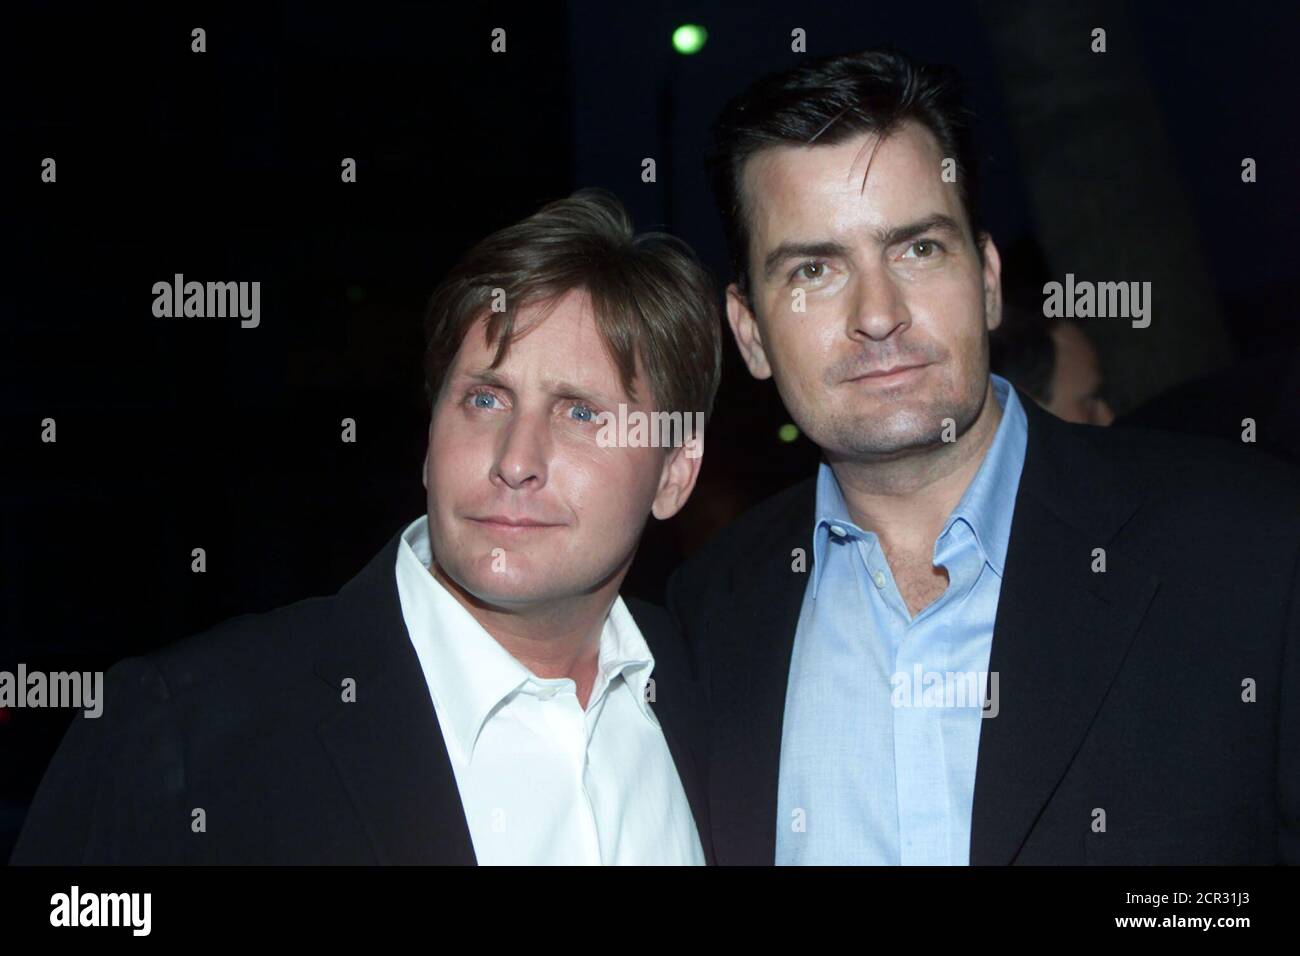 Brothers Emilio Estevez (L) and Charlie Sheen pose for a photo at the premiere of the movie 'Rated X,' at the Academy of Motion Picture Arts and Sciences in Beverly Hills, April 27. Estevez and Sheen star in the movie as the Mitchell brothers, who brought adult filmmaking into the mainstream. Estevez directs the movie.  JC/HB Stock Photo